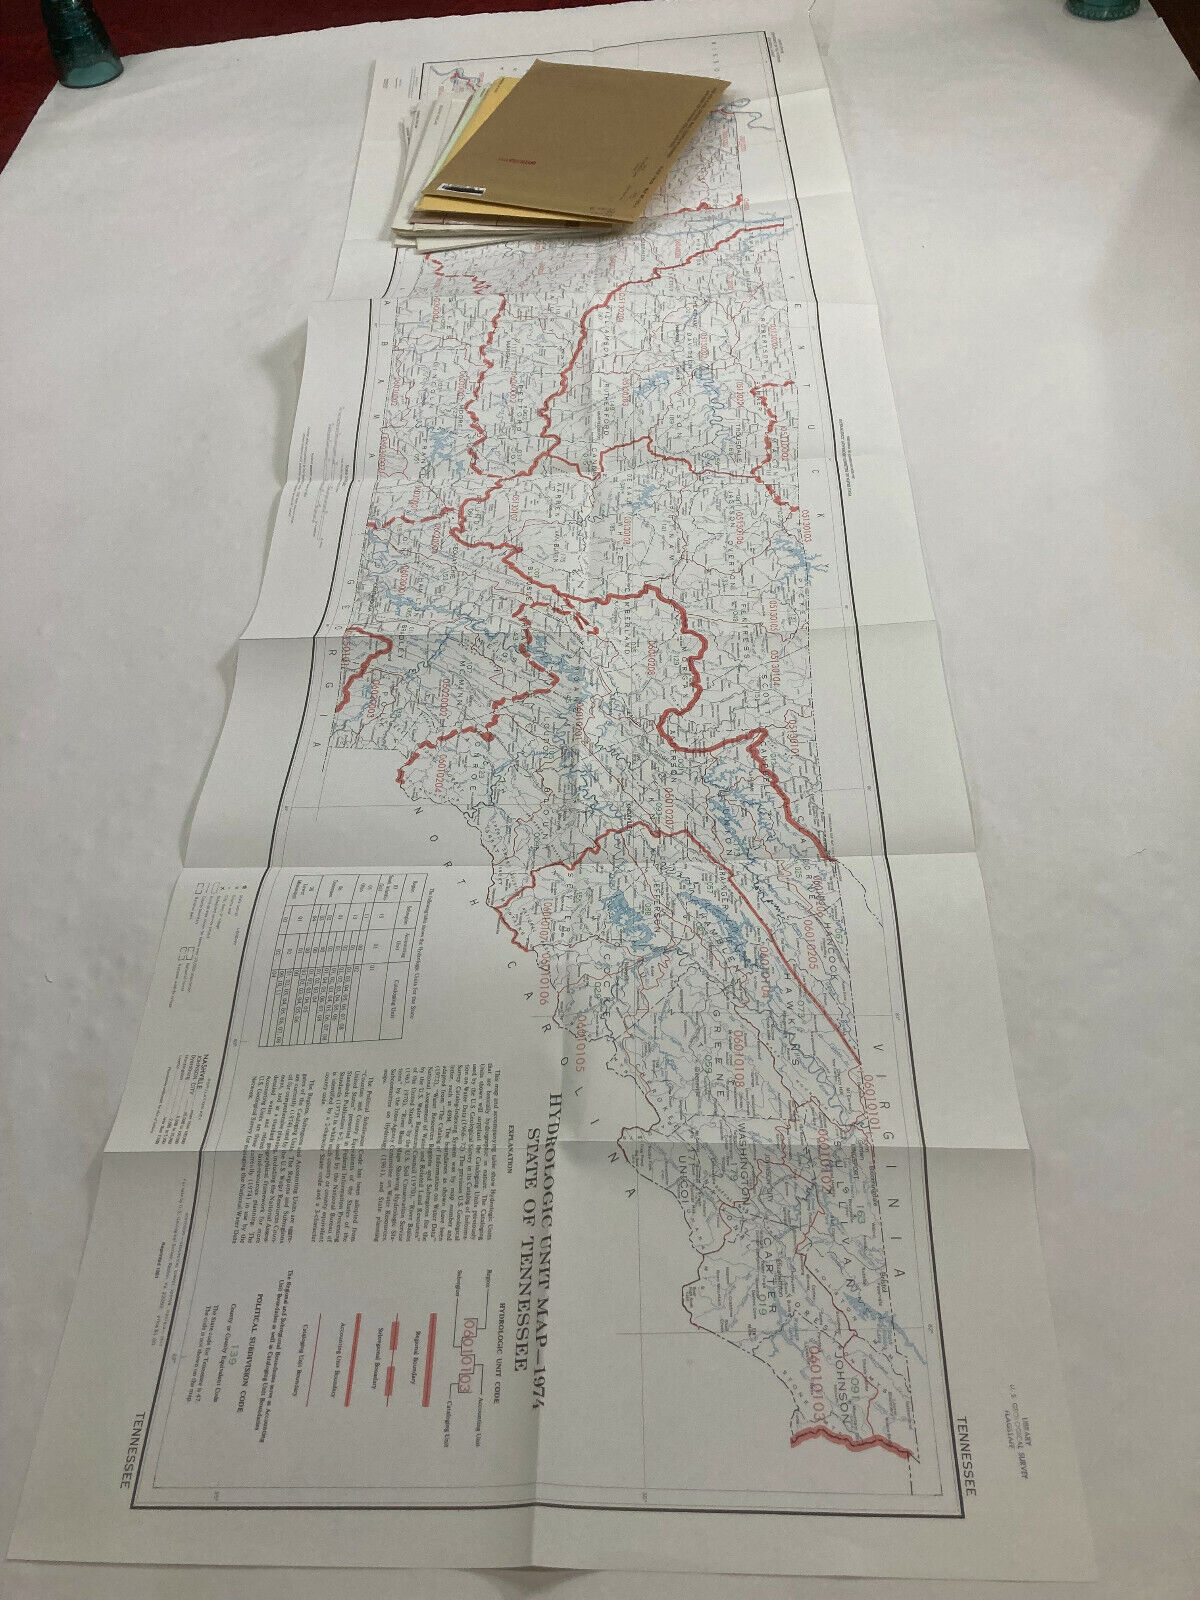 Tennessee Usgs Maps Indexes - Hydrologic - Cohutta Wilderness  - Geologic Maps